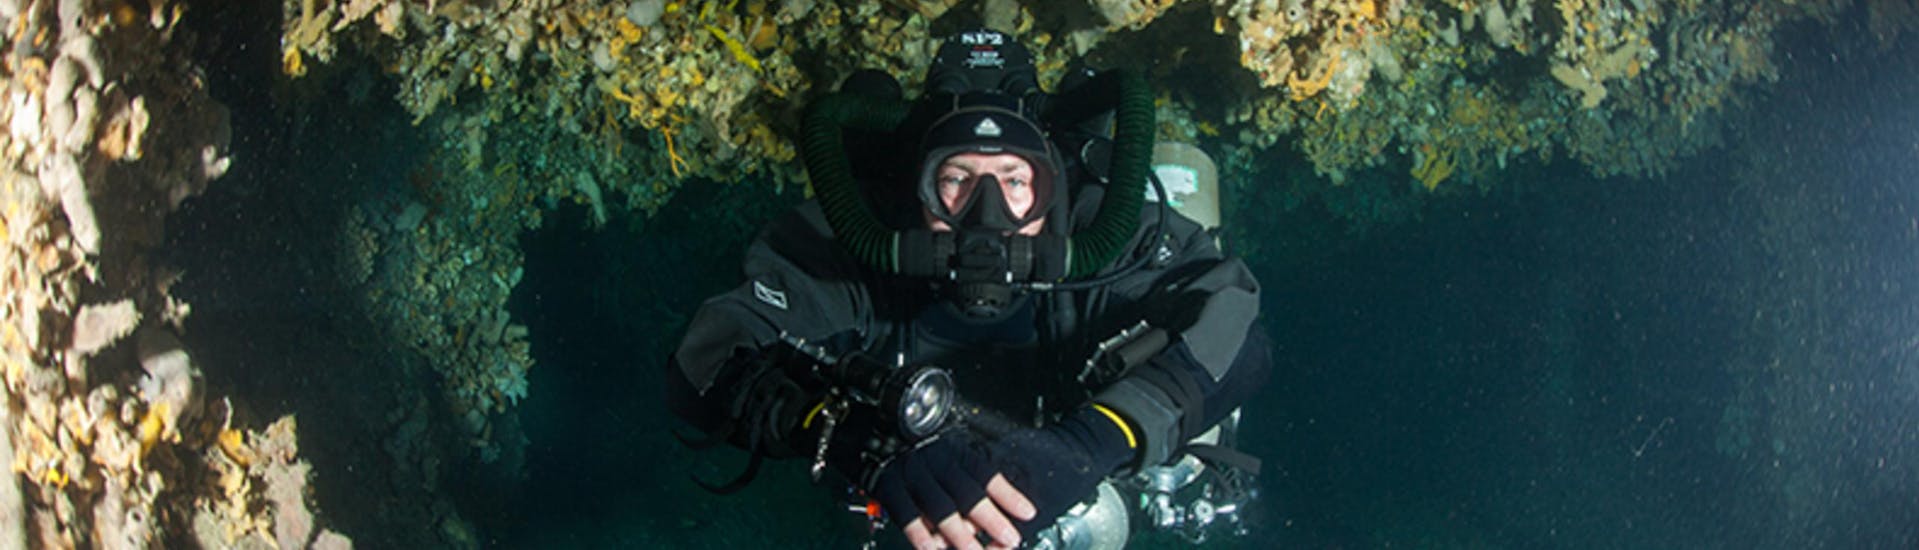 Scuba Diving Course - SSI Specialty Dives.